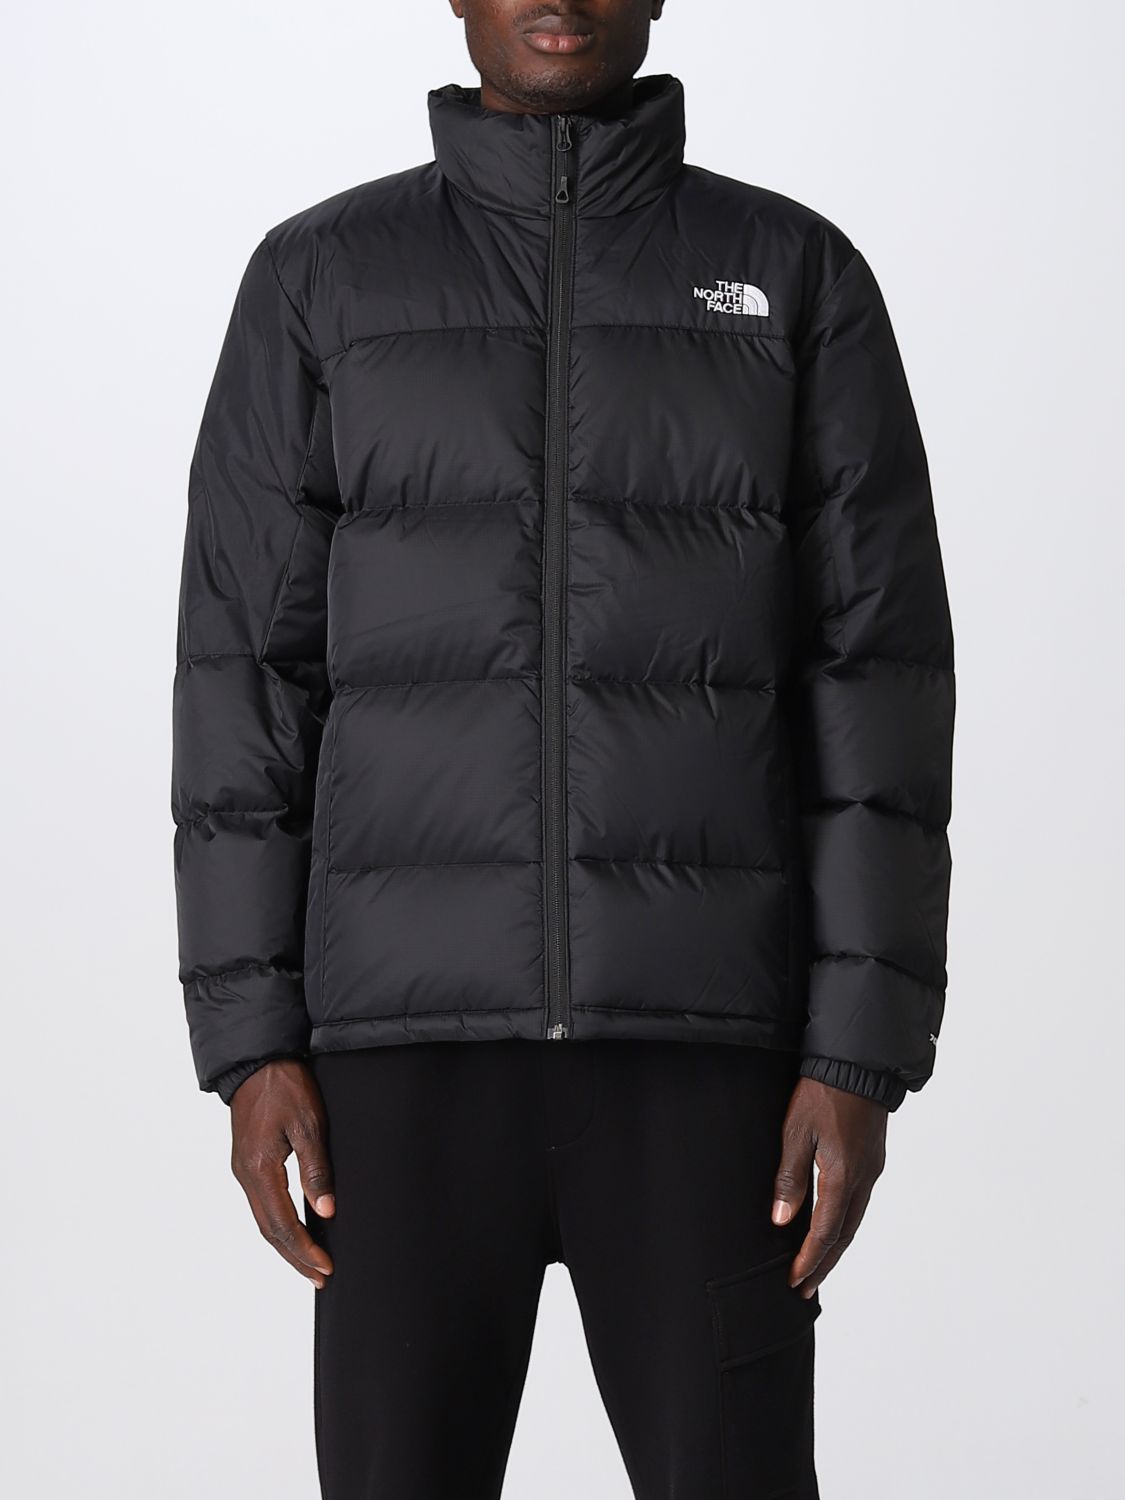 THE NORTH FACE: jacket for man - Black | The North Face jacket NF0A4M9J ...